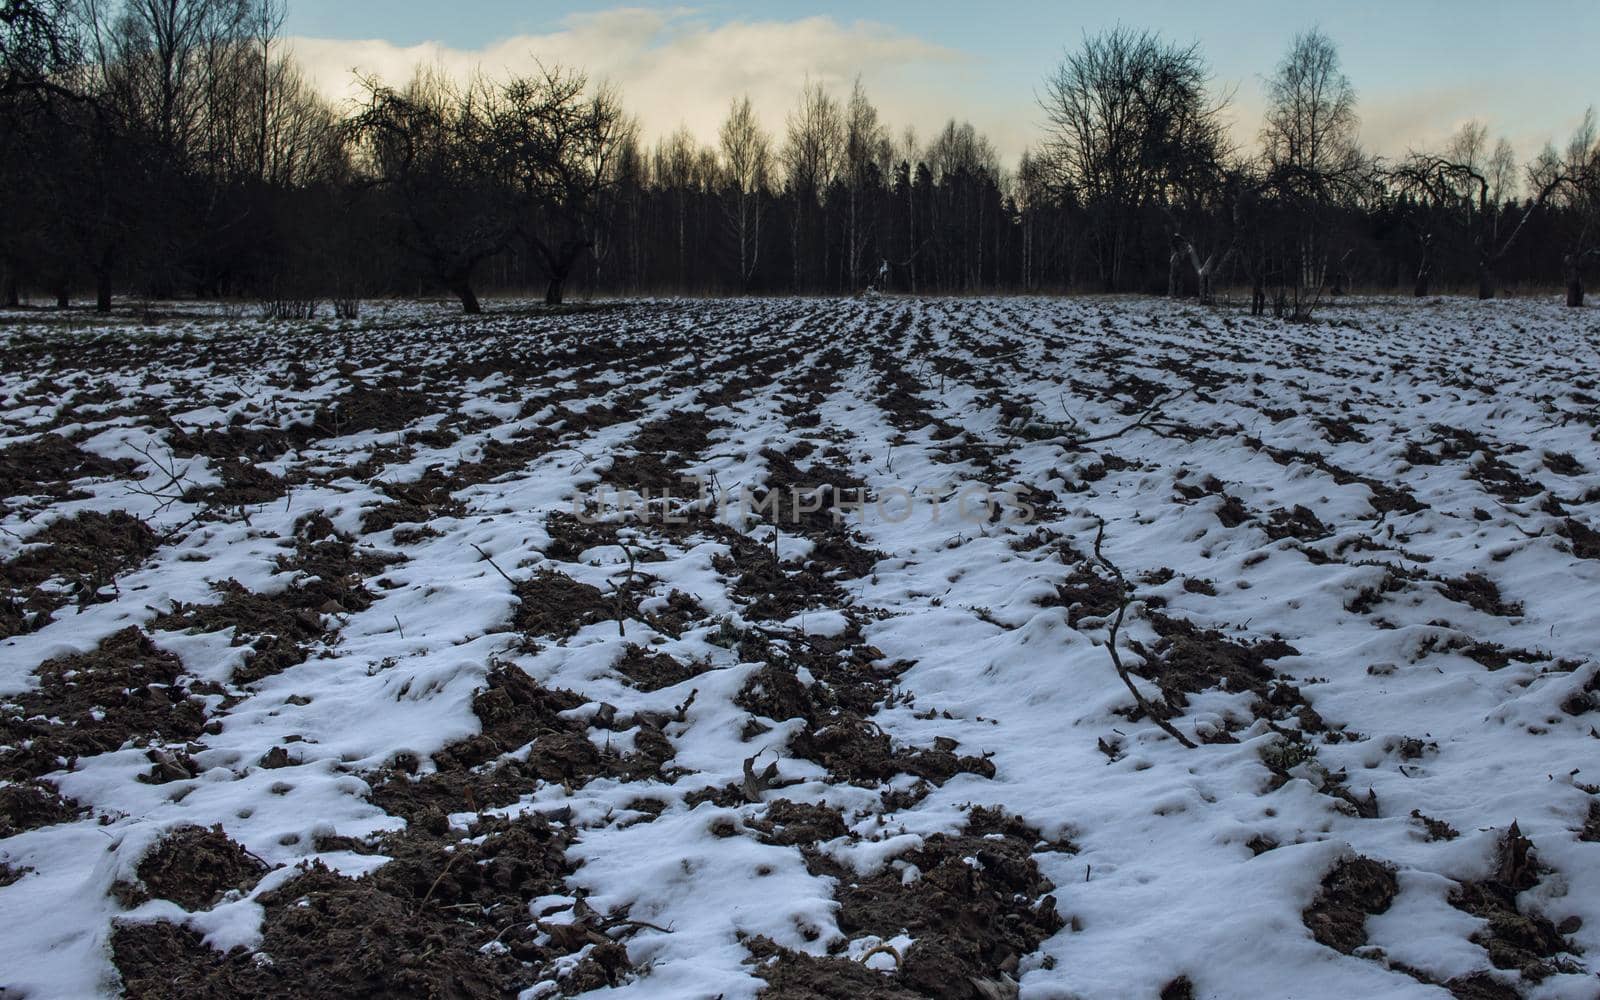 Potato field perspective view in winter time